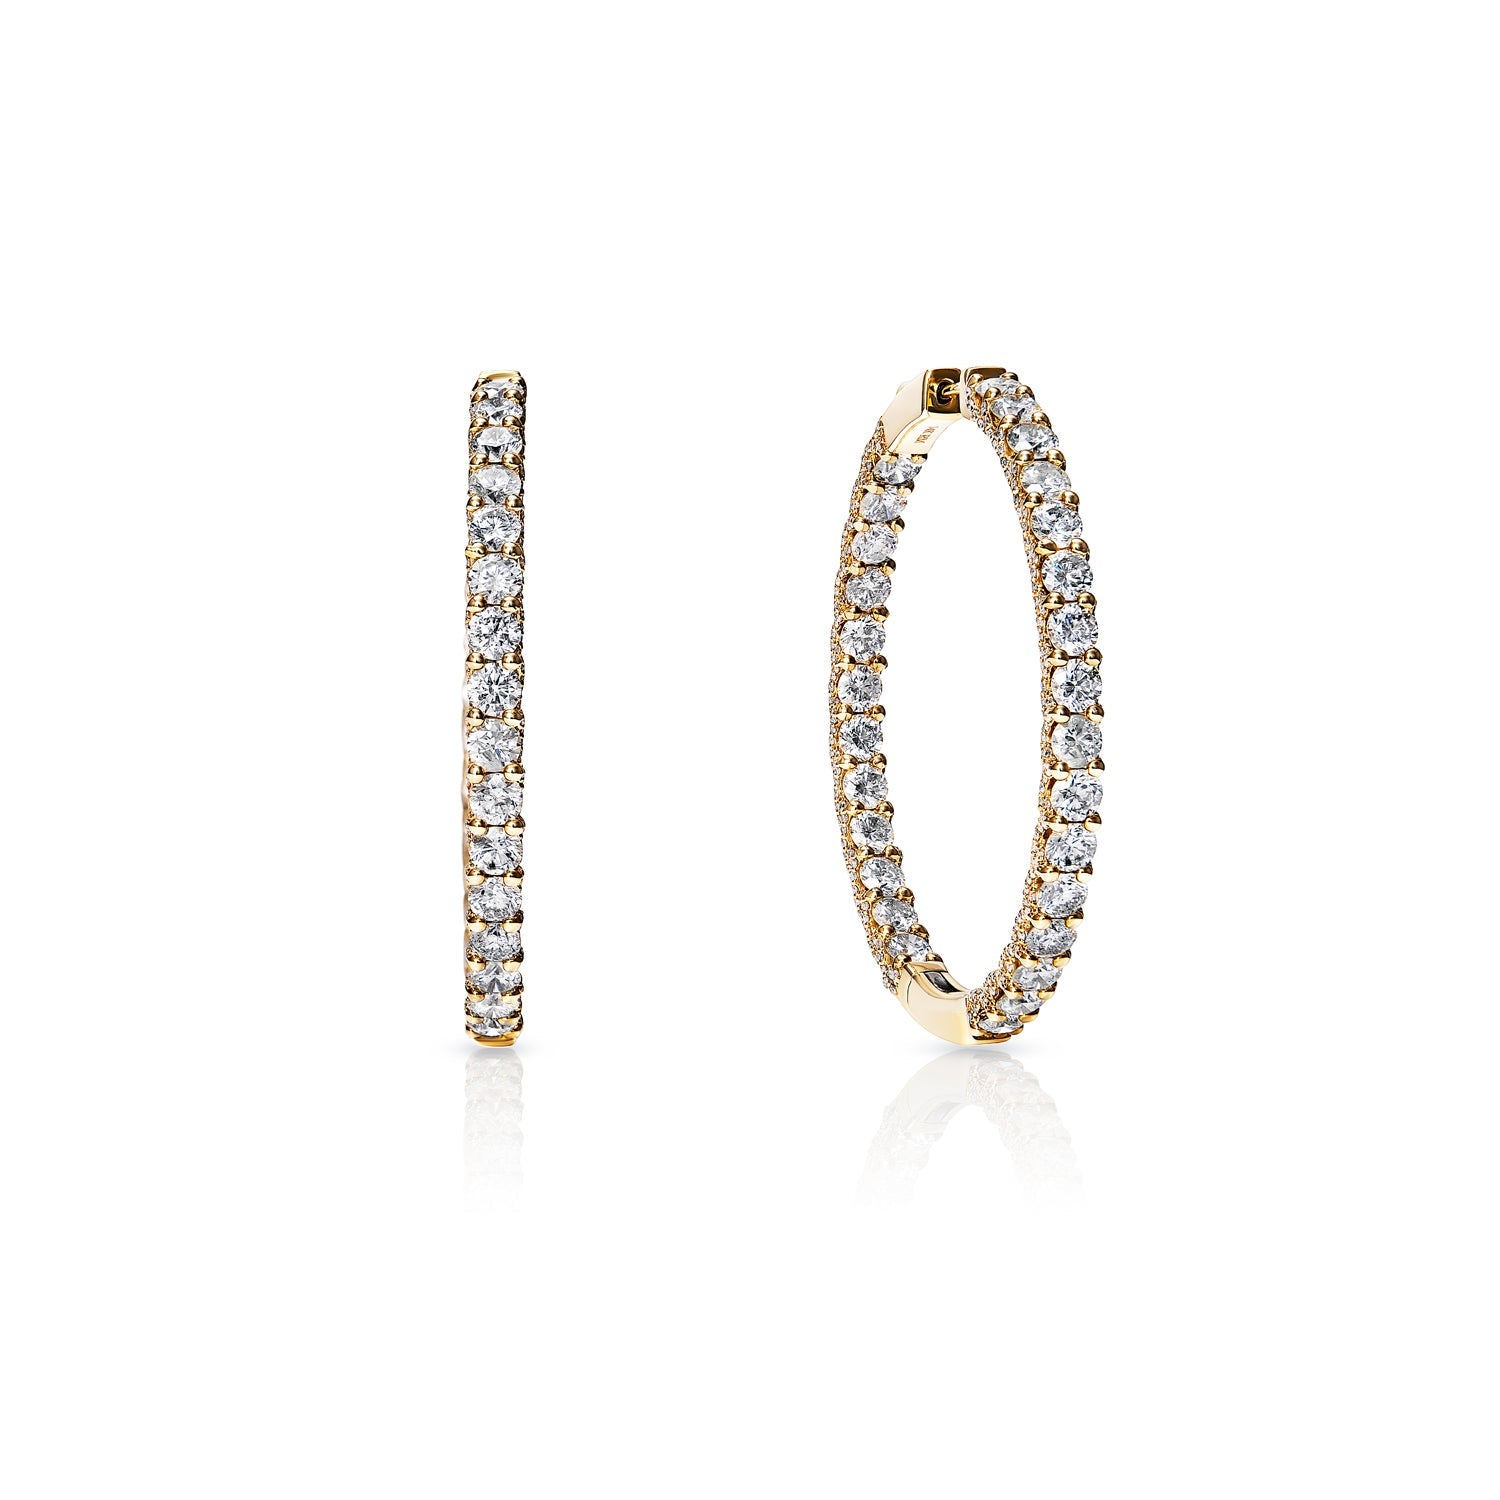 Avery 11 Carat Round Brilliant Diamond Hoop Earrings in 14 Karat Yellow Gold Front and Side View